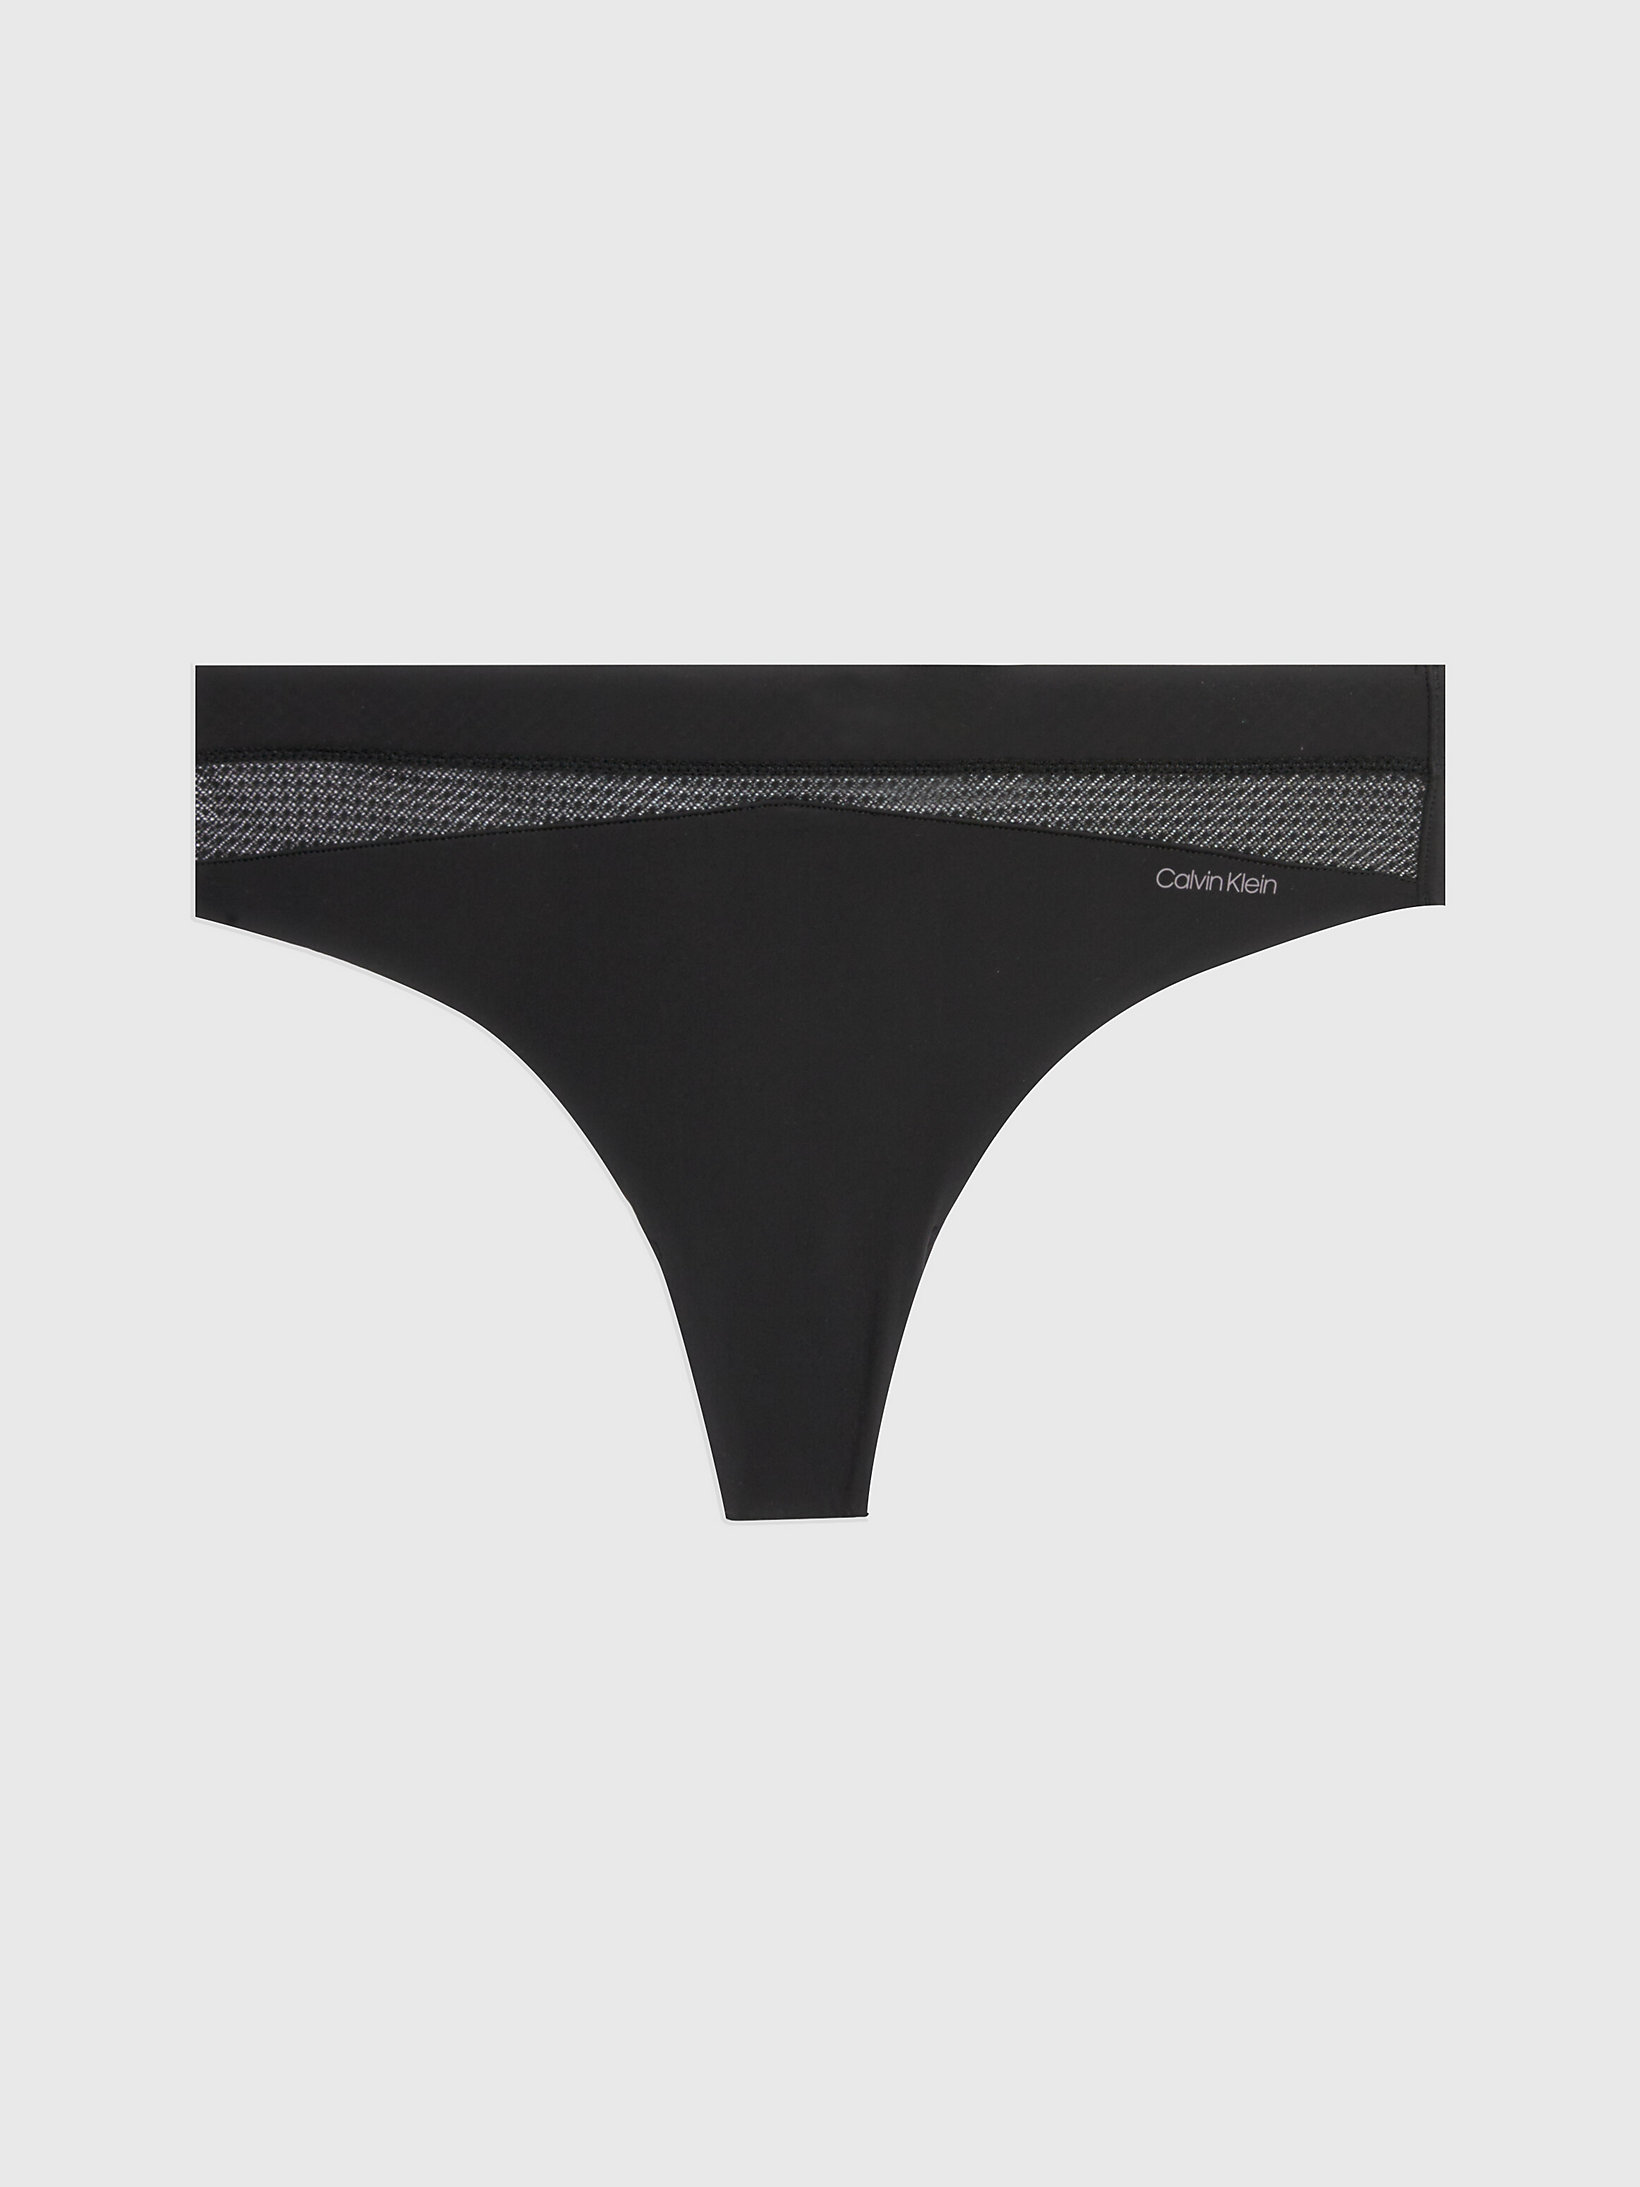 Black Thong - Perfectly Fit Flex undefined women Calvin Klein